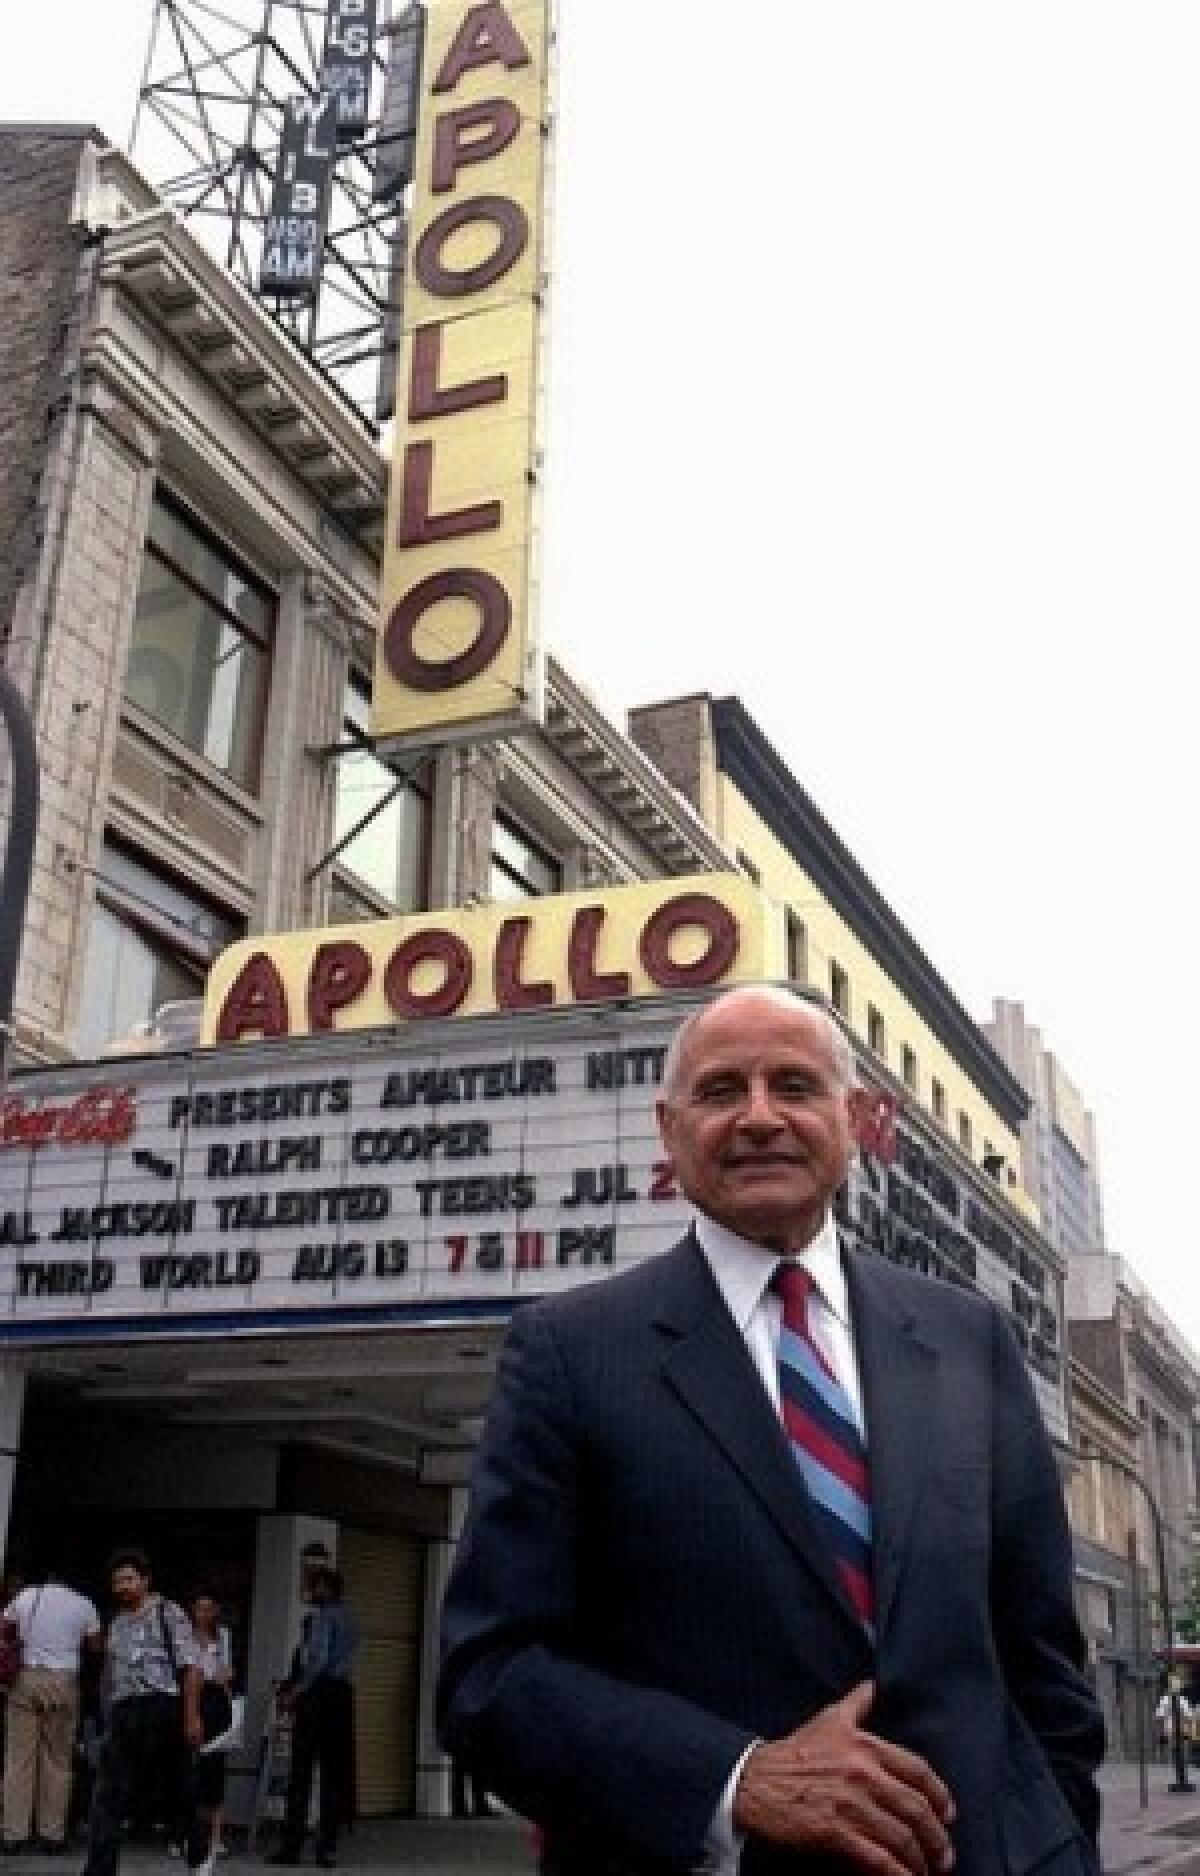 Percy Sutton bought and renovated Harlem's Apollo Theater when it appeared doomed to closure. He gave legal counsel to Malcom X and his family for decades.